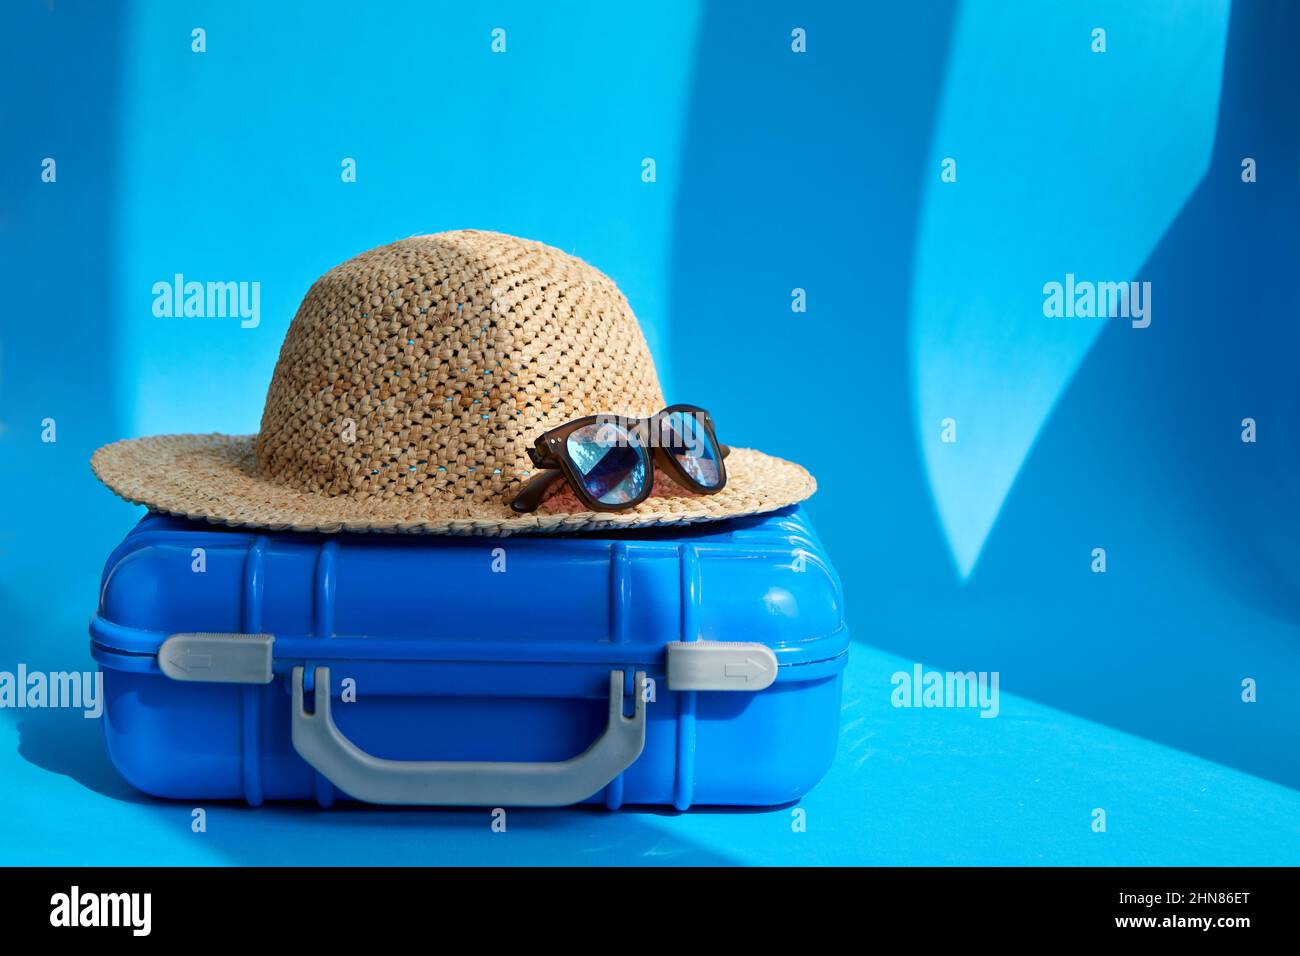 Plastic blue suitcase with straw hat and sunglasses placed on floor in bright studio for summer vacation Stock Photo